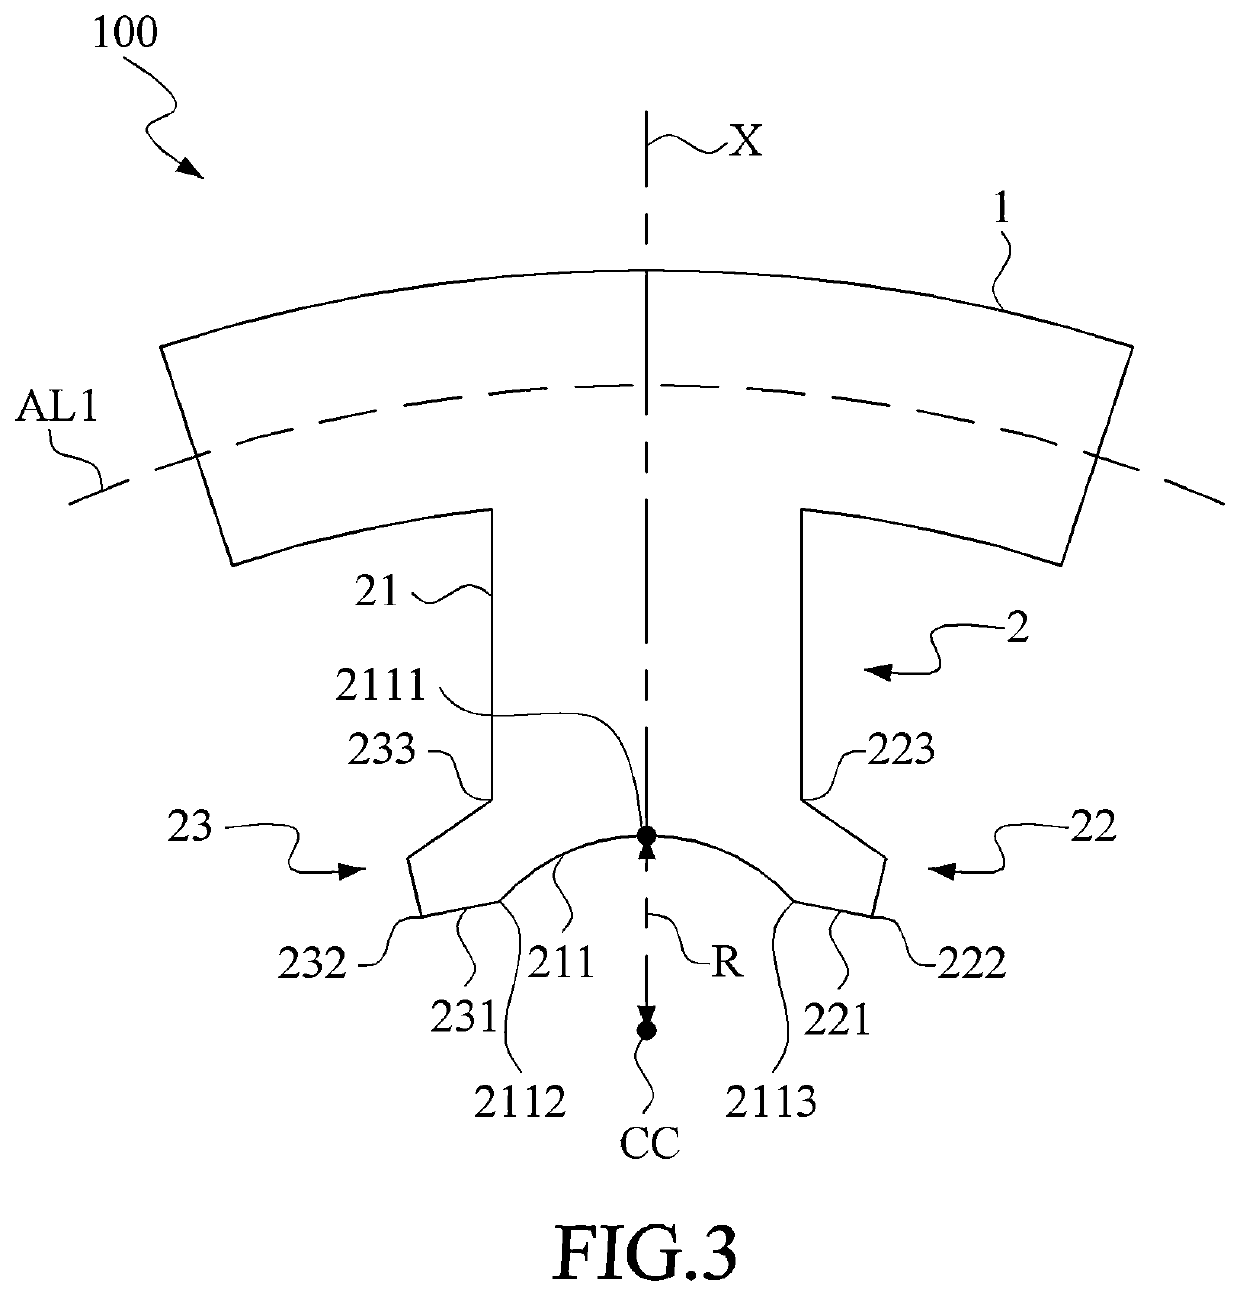 Stator tooth with stator-tooth arc-cutting structure